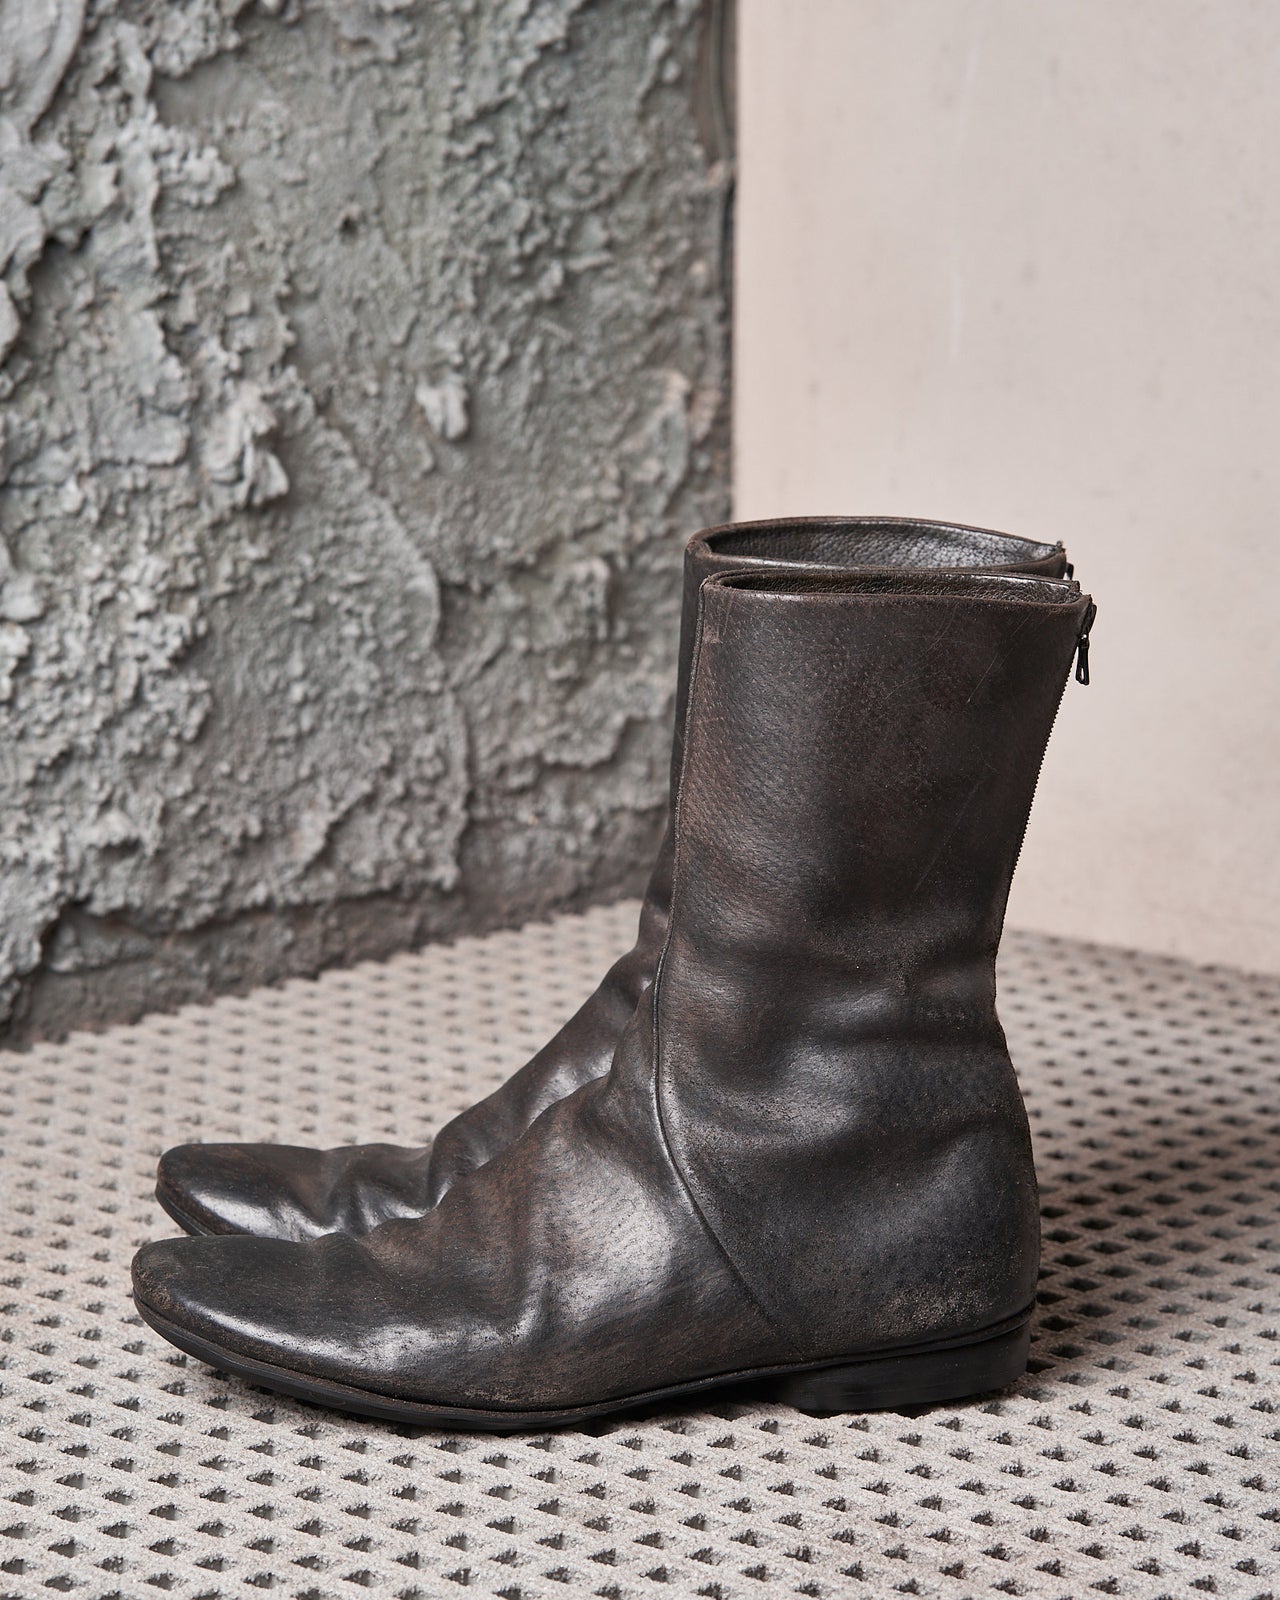 Pig leather boots